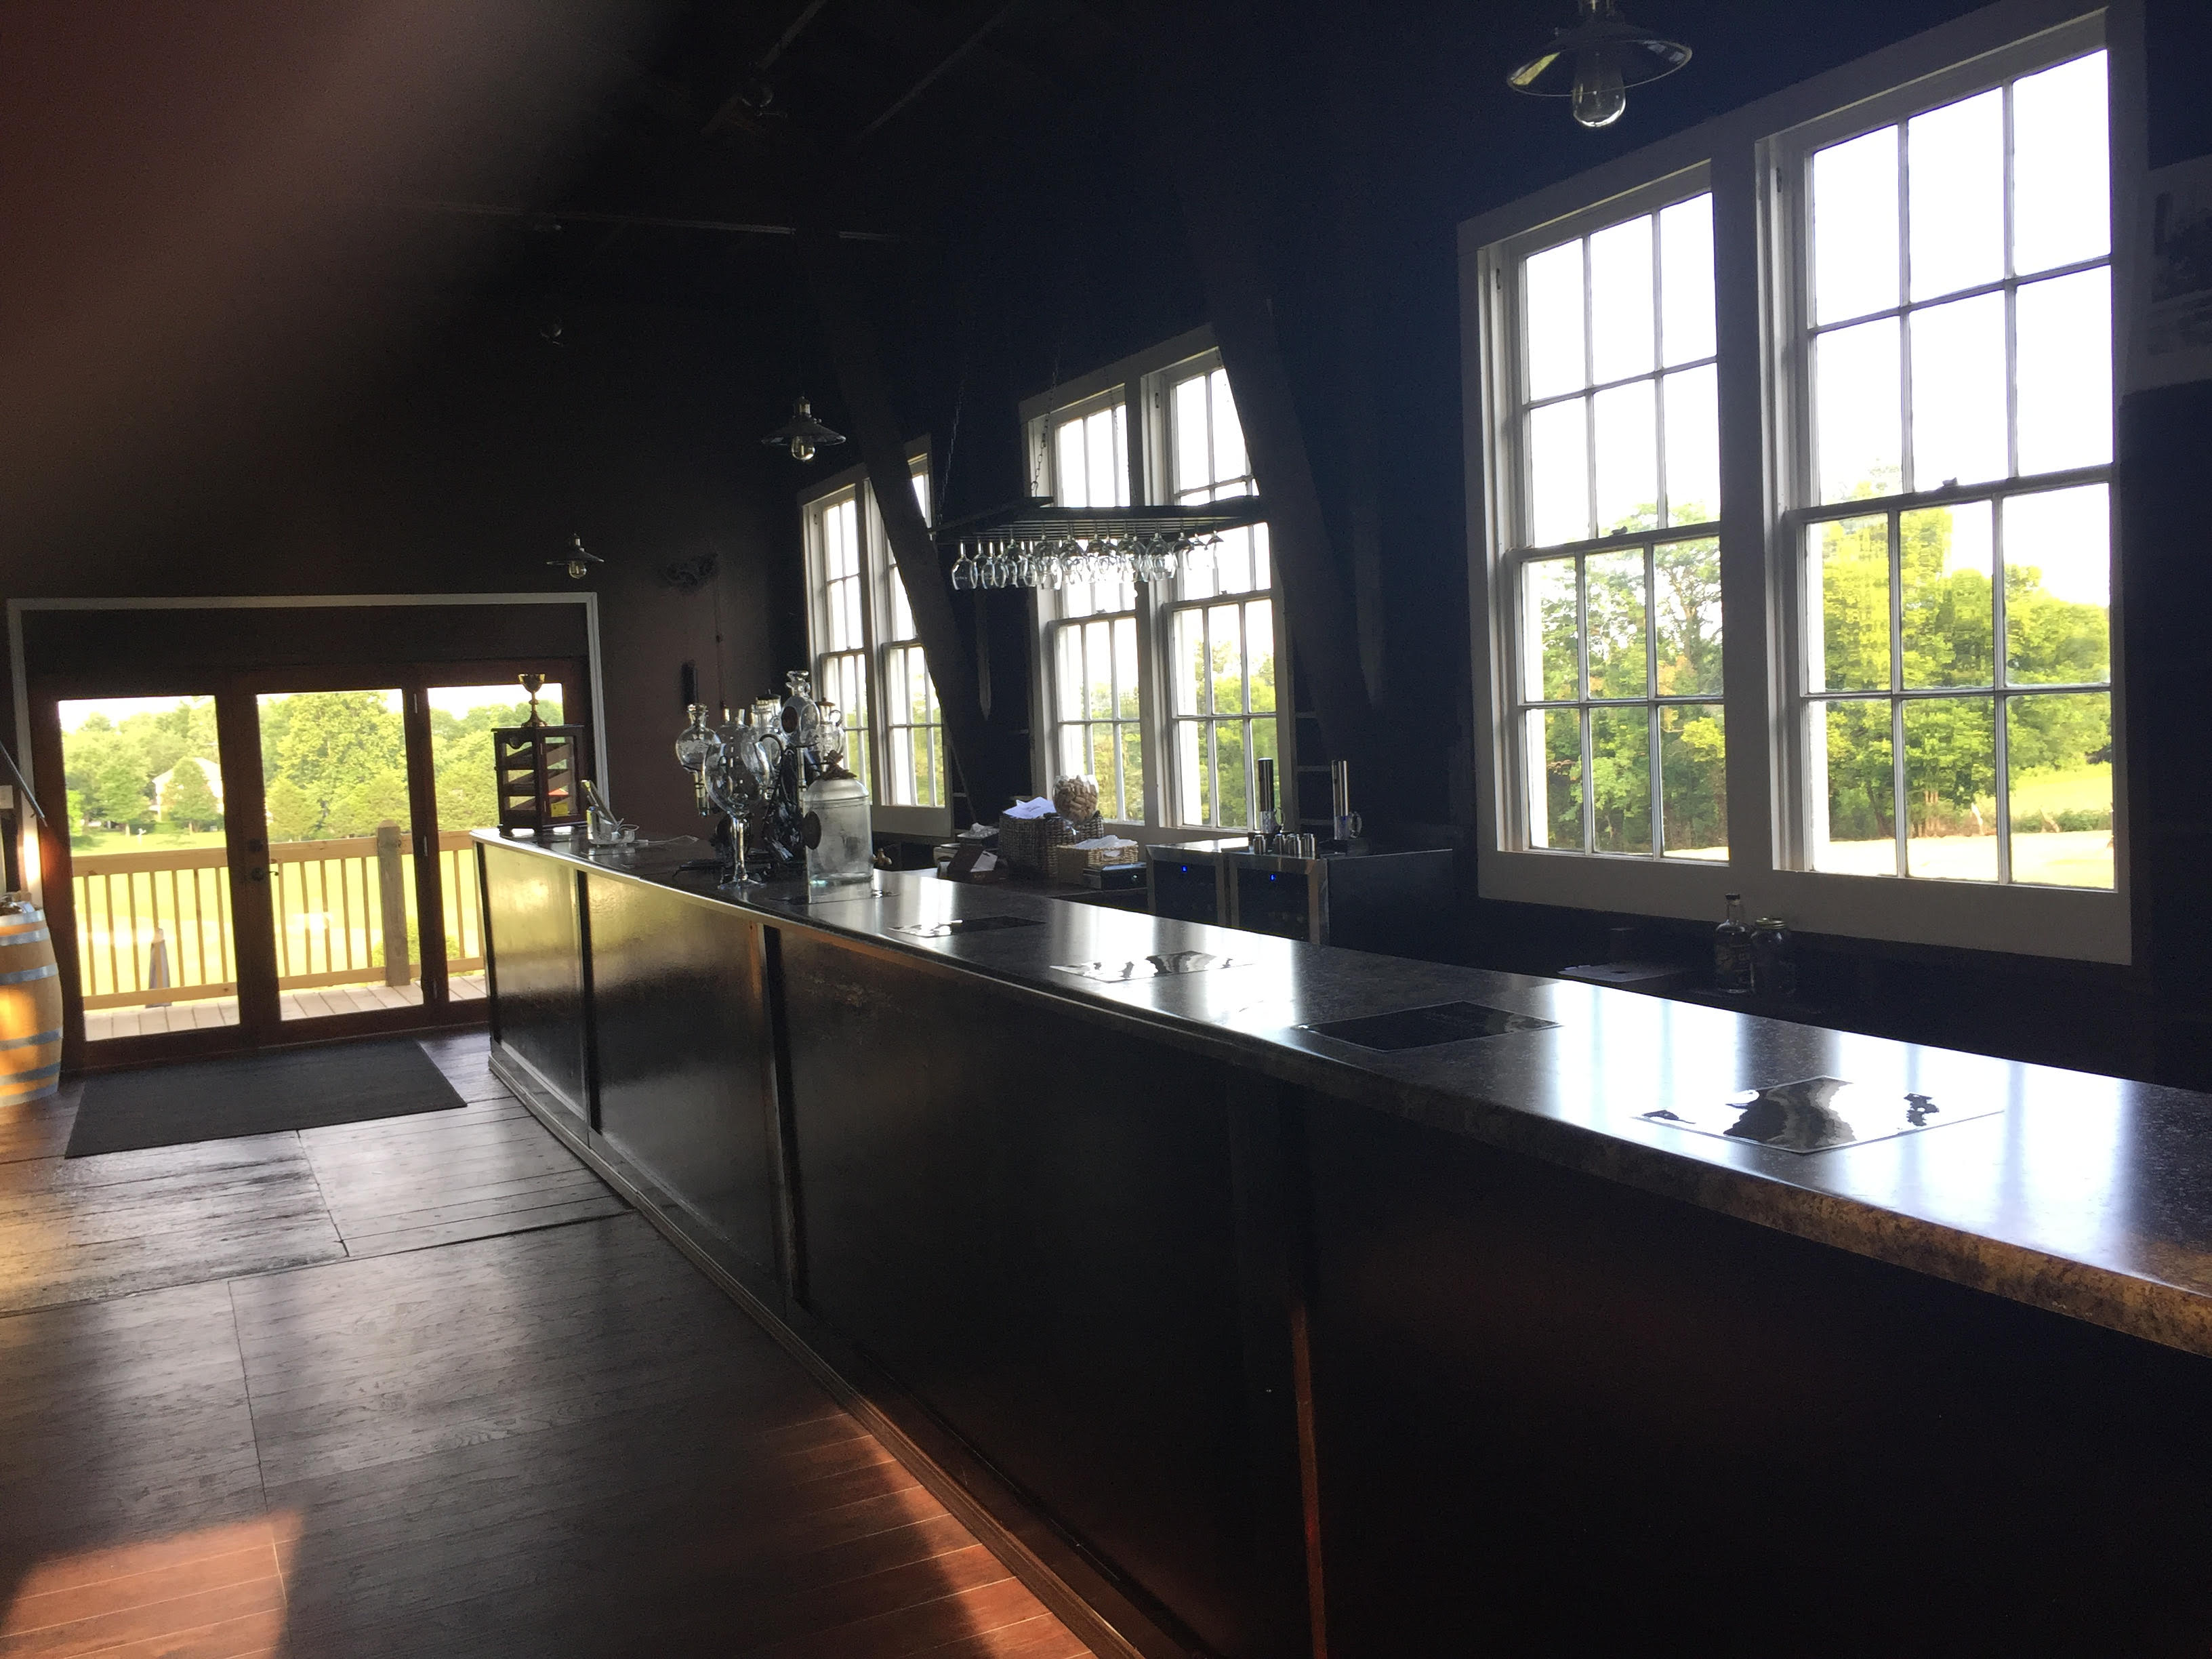 Holy Grail Winery & Vineyard- Indoor bar with several white trimmed windows behind